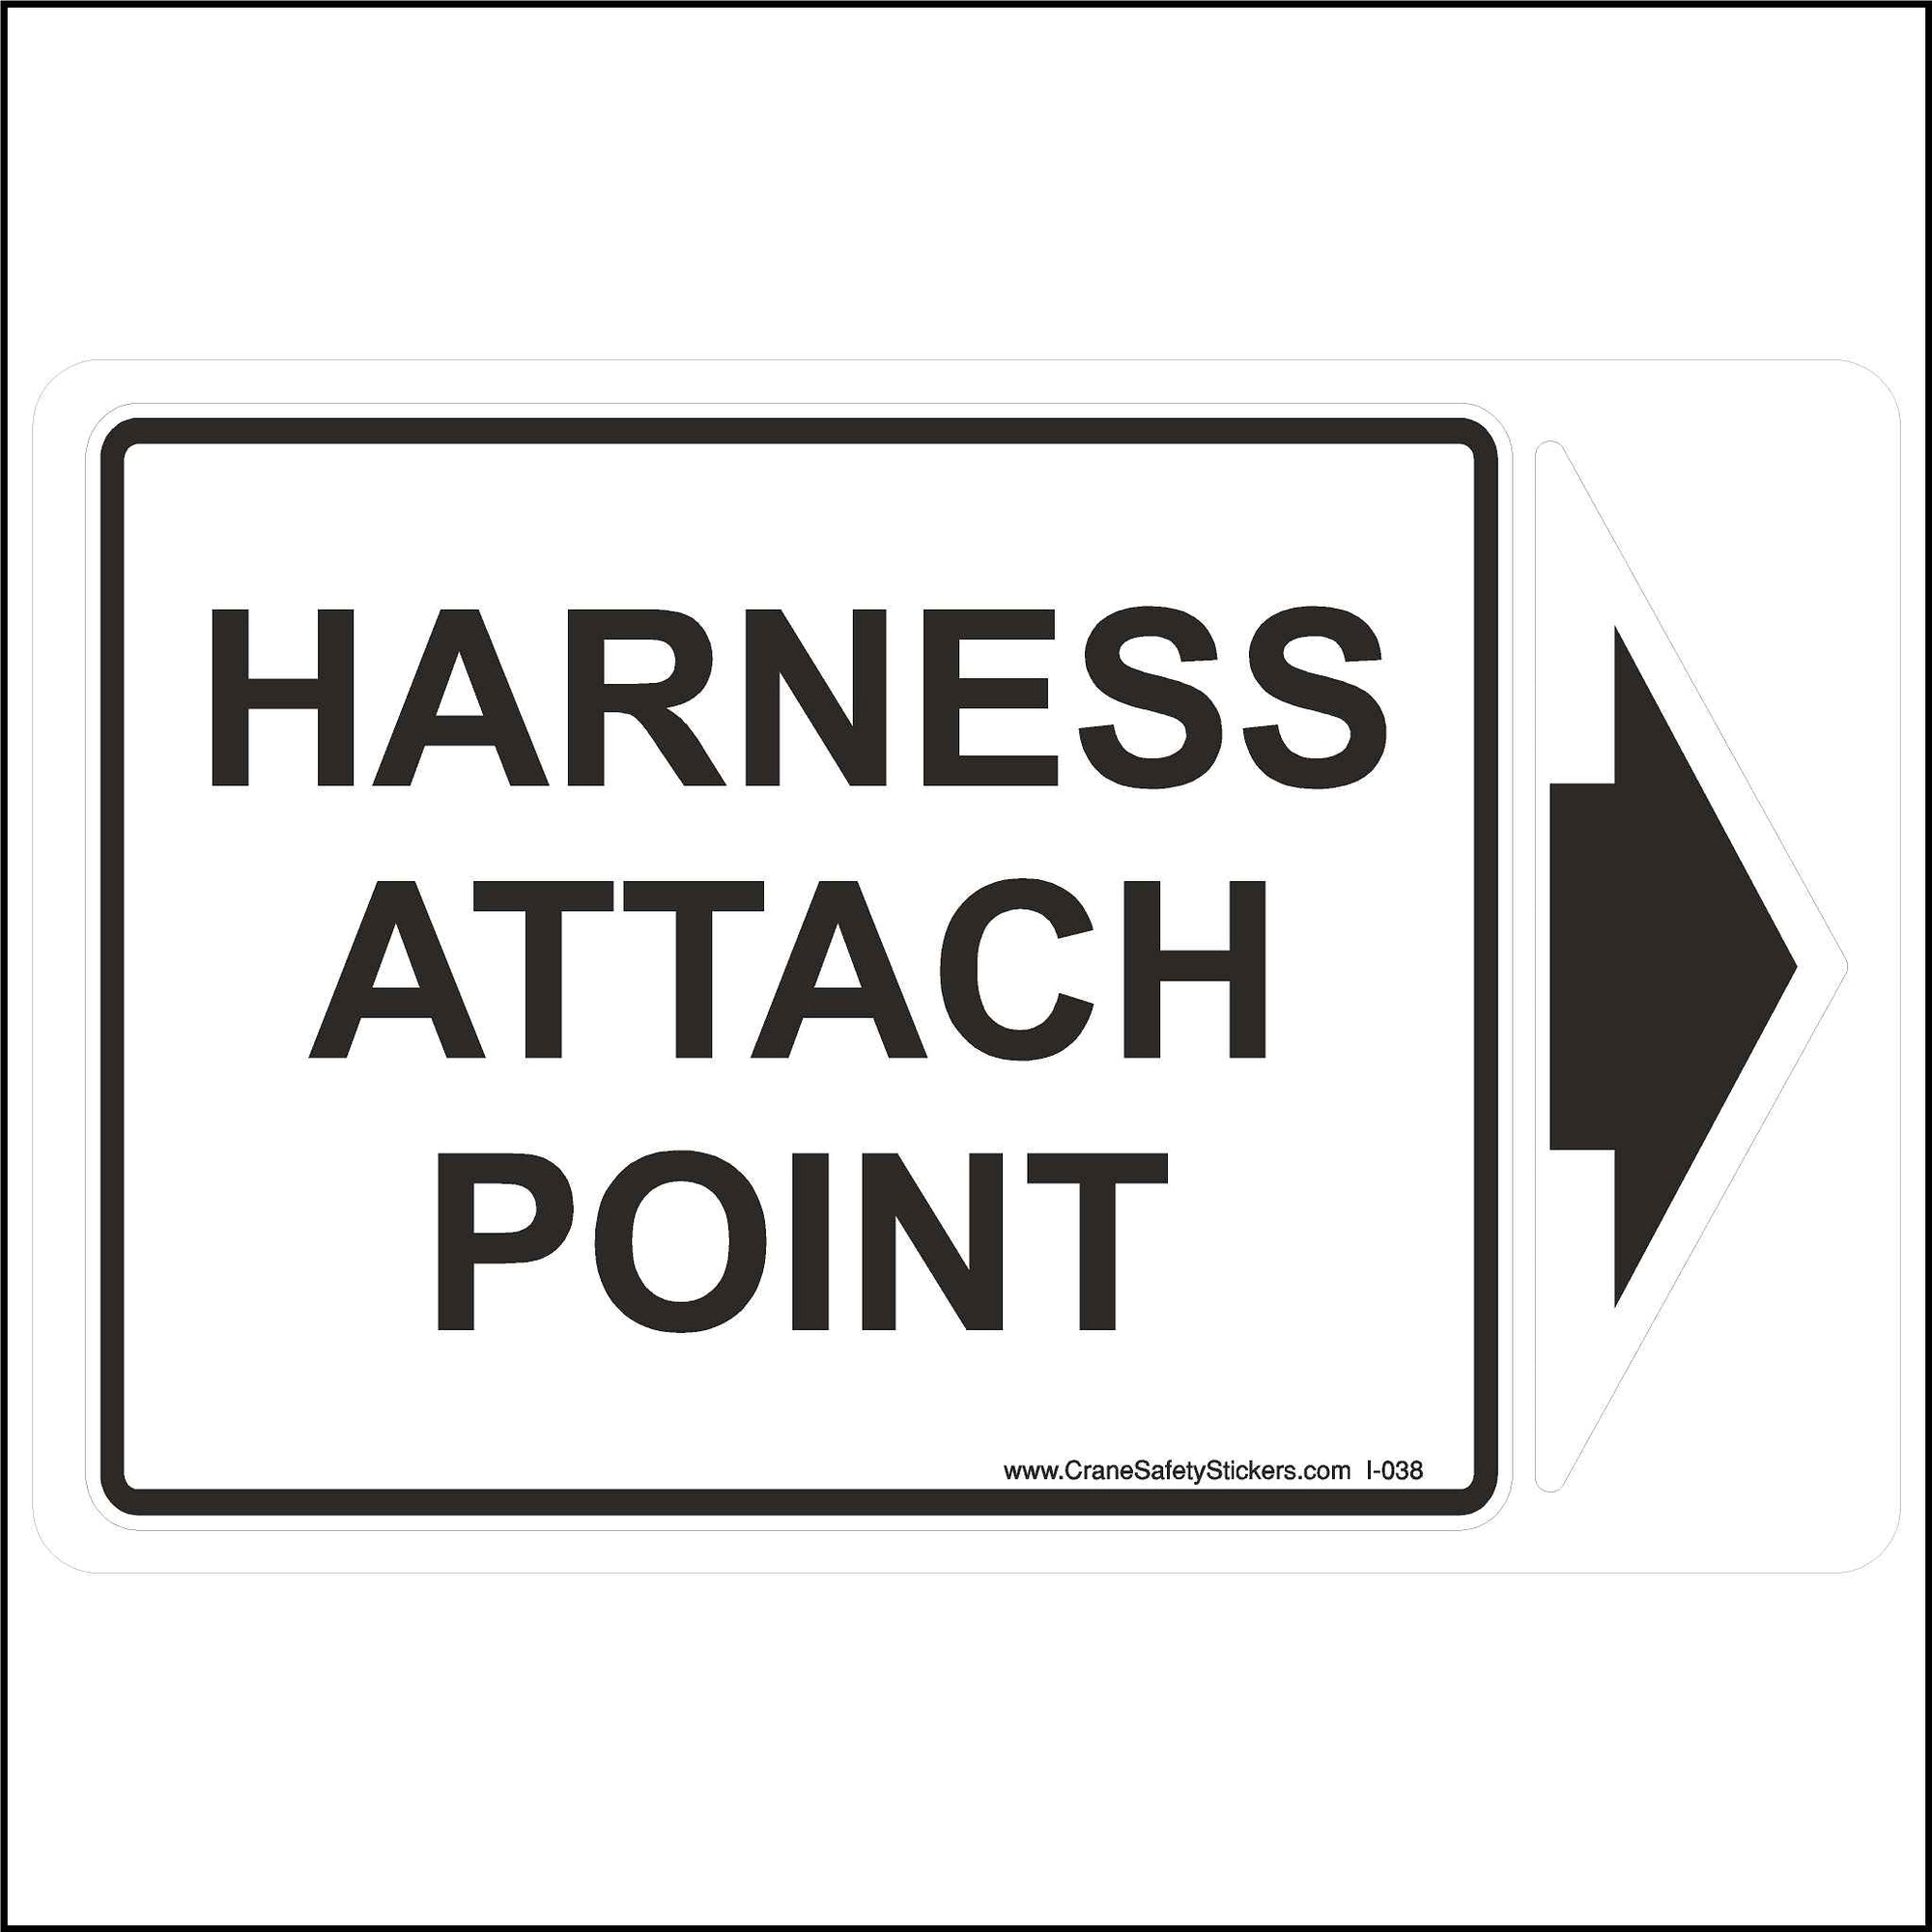 This harness attach point sticker and label have black lettering and a white background. The arrow in separate from the text so it can be placed to point directly to the attach point. 